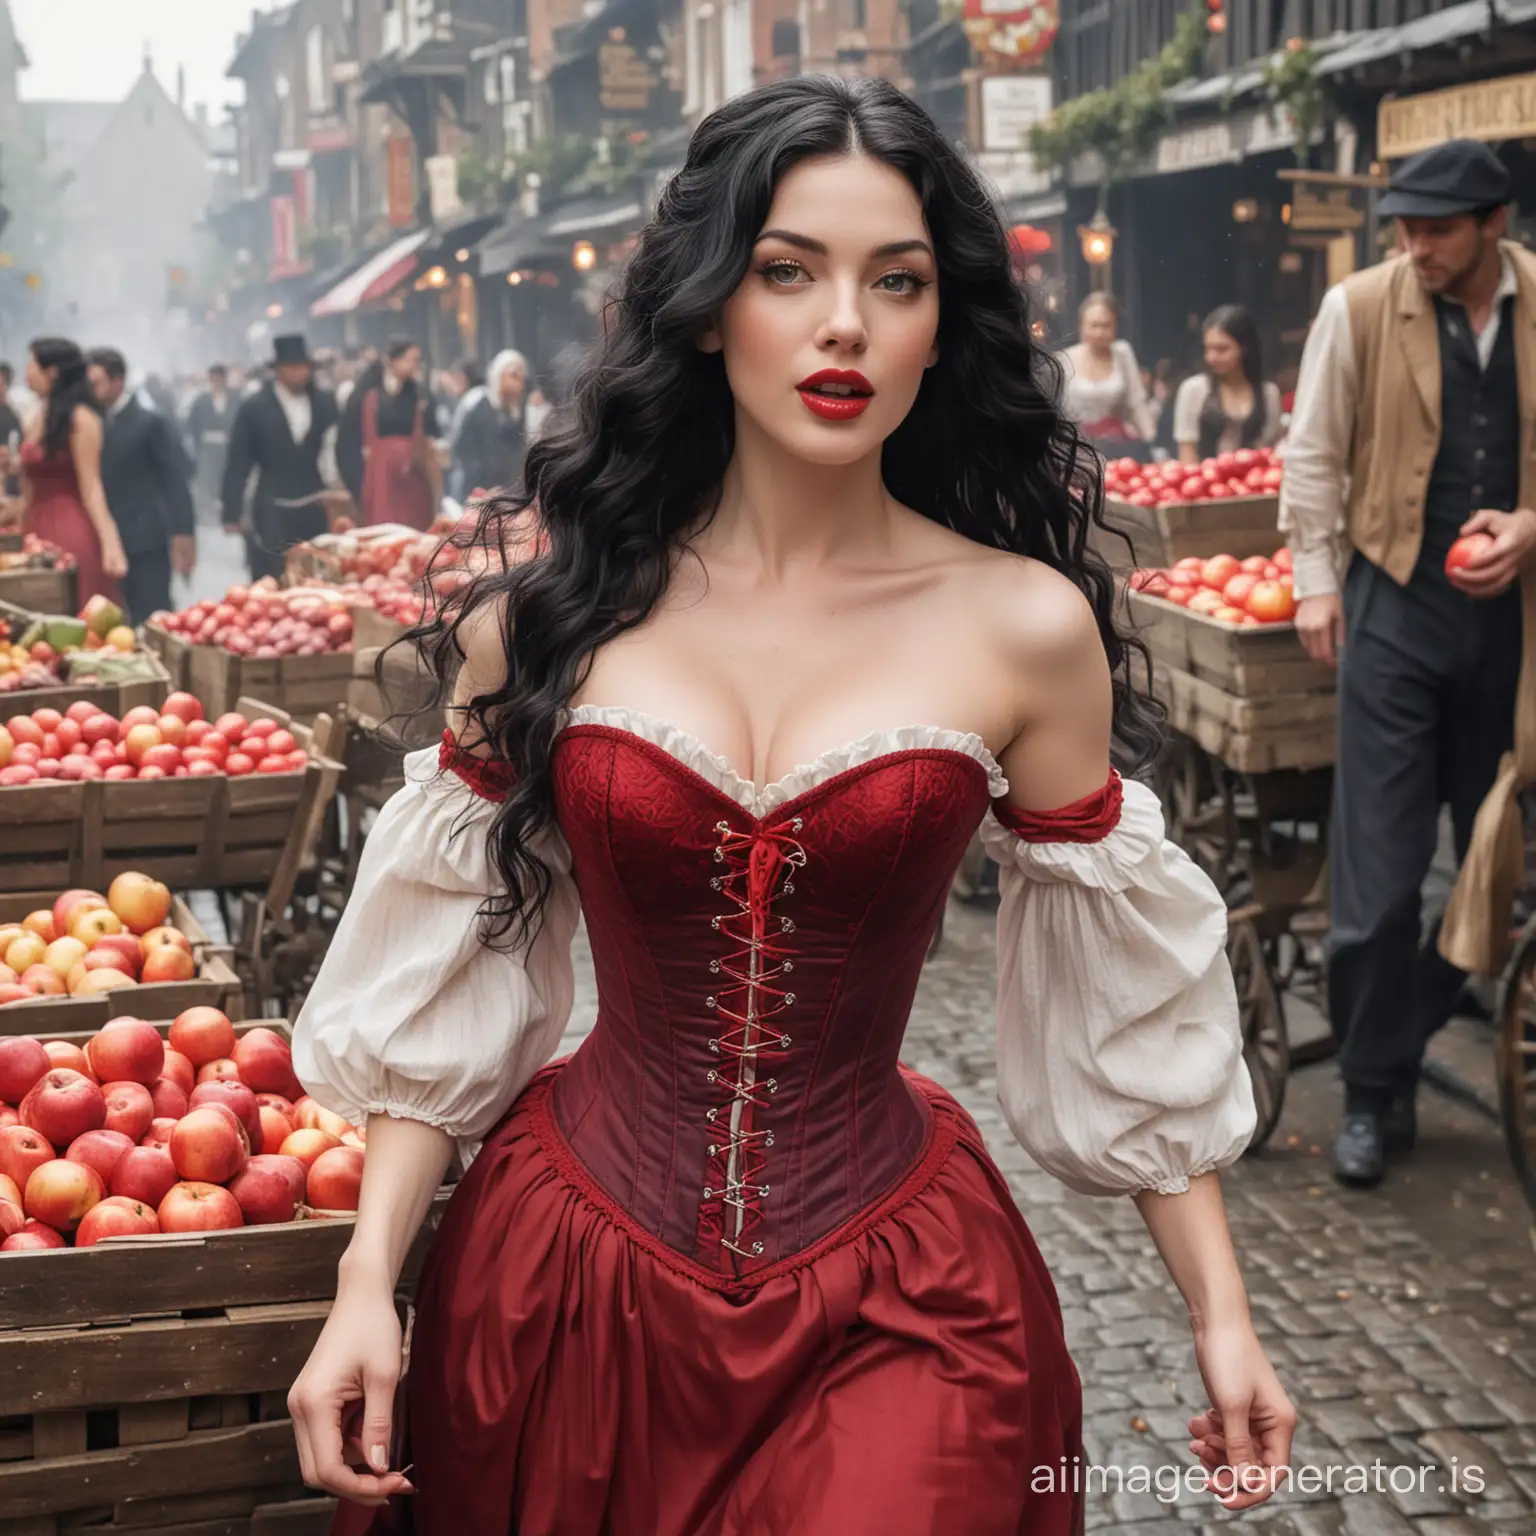 Victorian-Woman-in-Red-Corset-Reaches-for-Apple-in-Crowded-London-Market